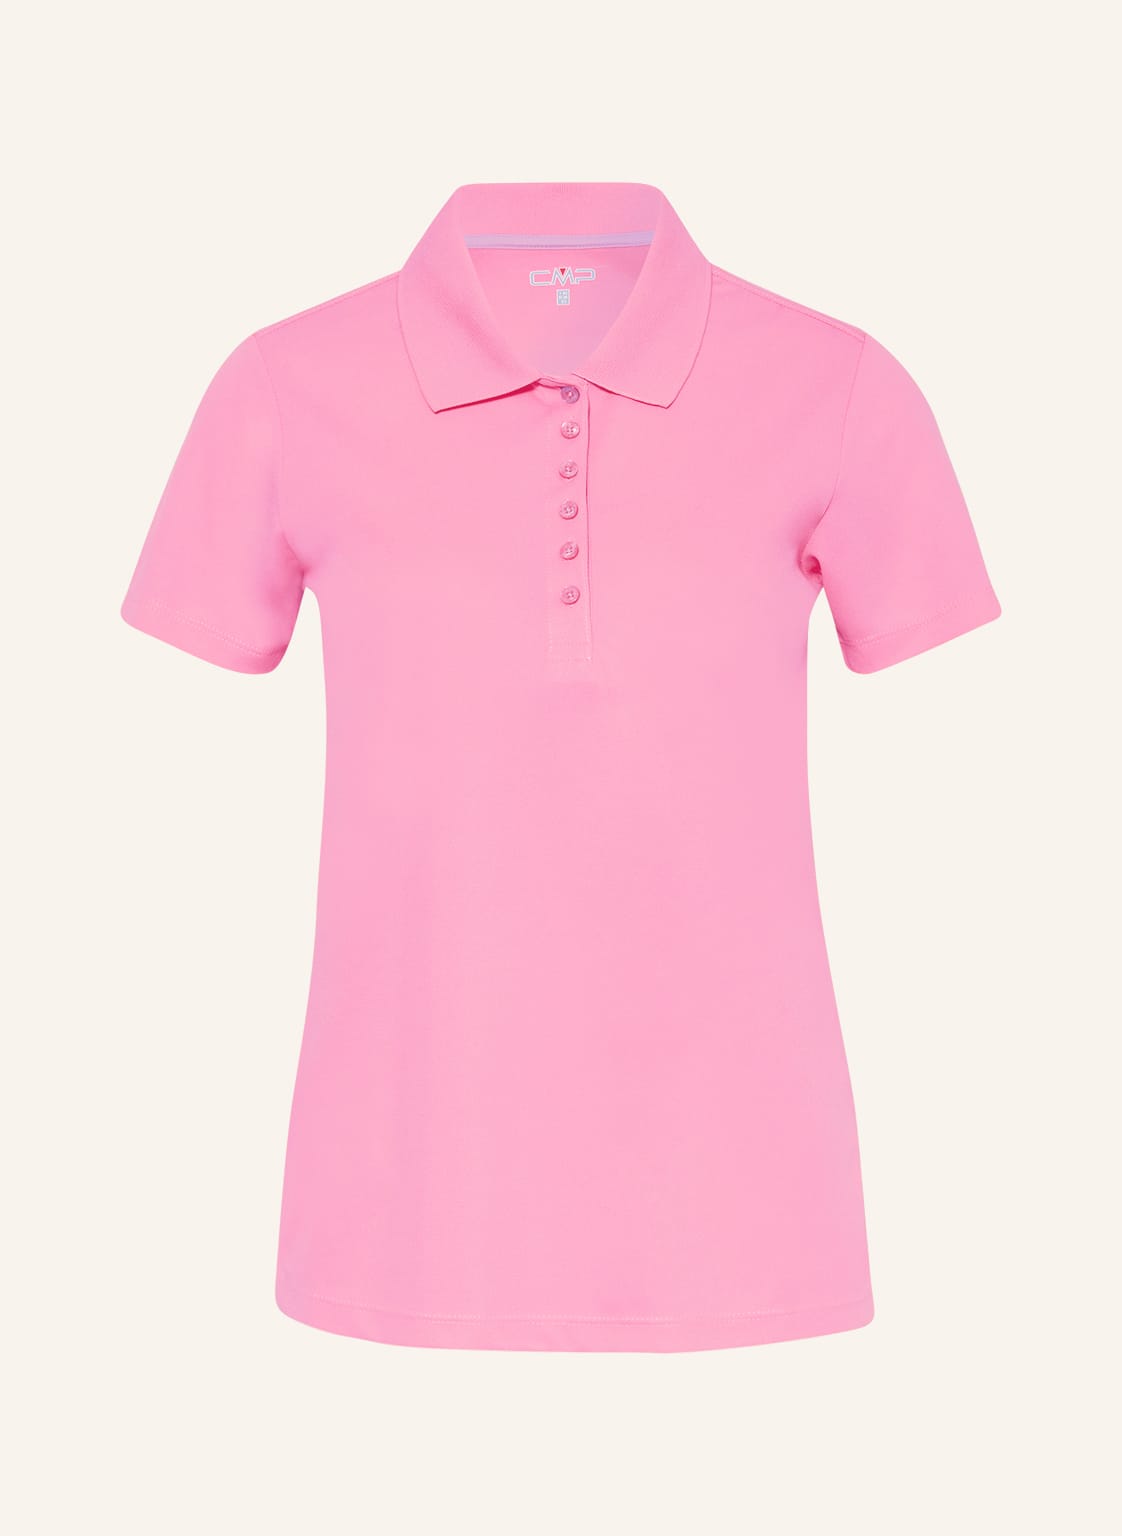 Image of Cmp Funktions-Poloshirt pink